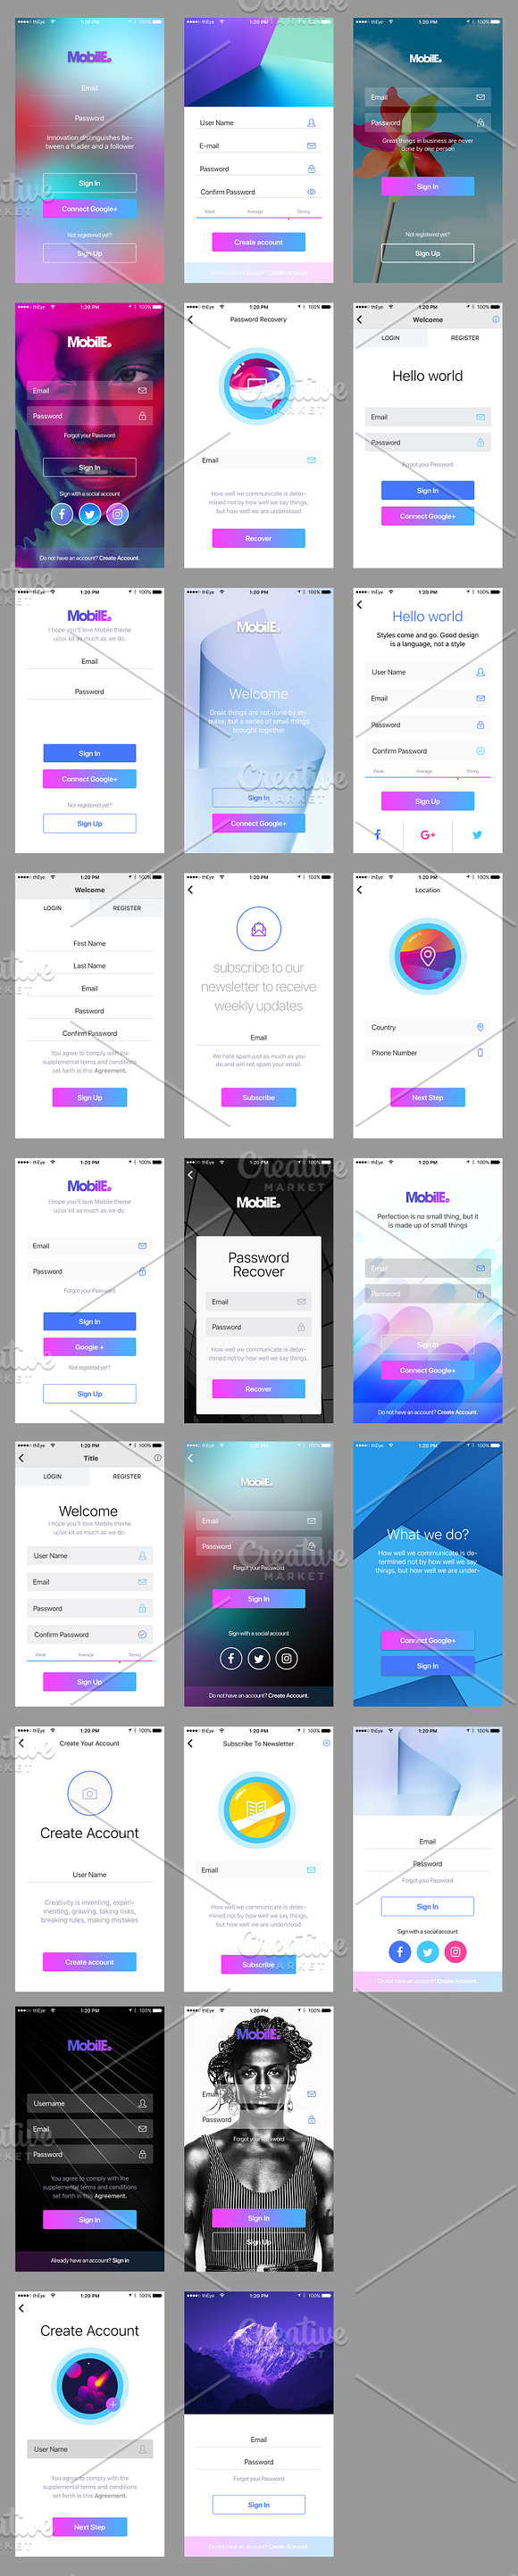 Mobile Theme UI/UX Kit in UI Kits and Libraries - product preview 4